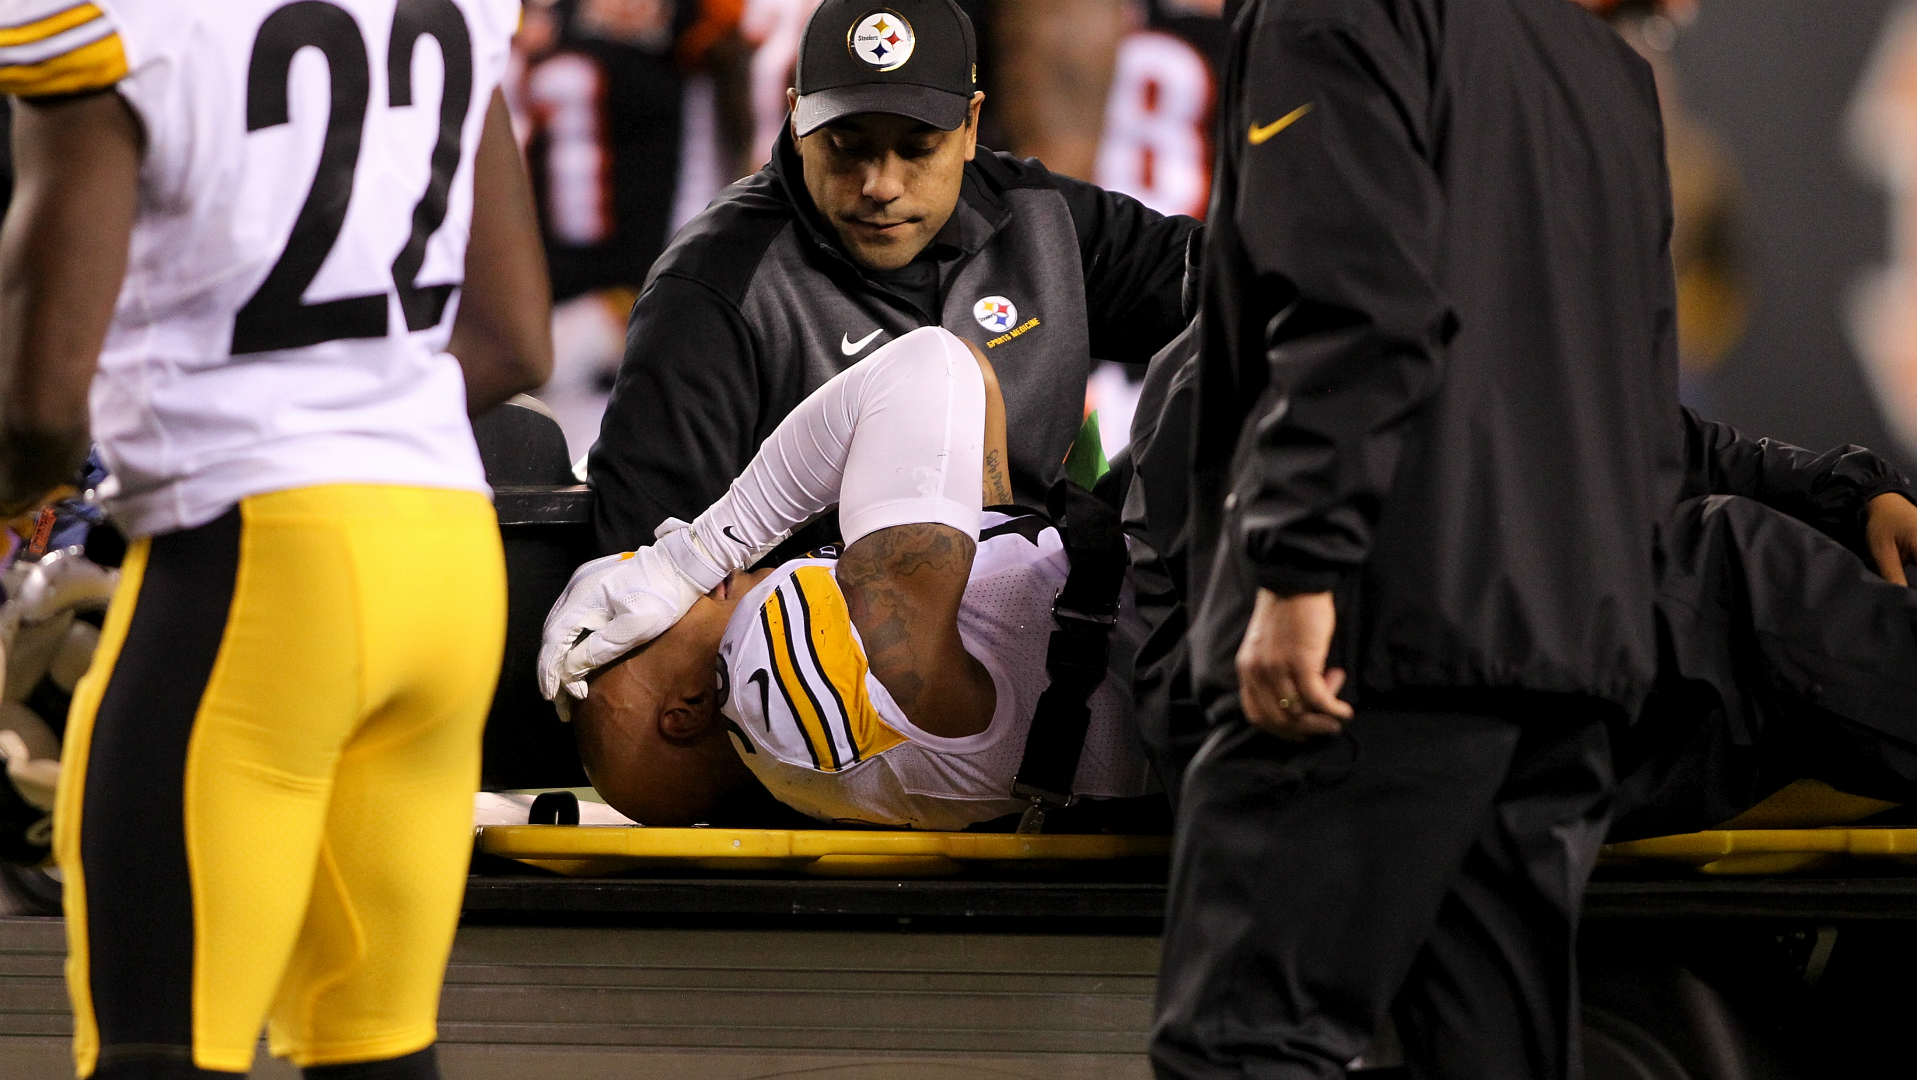 Ryan Shazier injury update: Steelers coaches, players say football return secondary